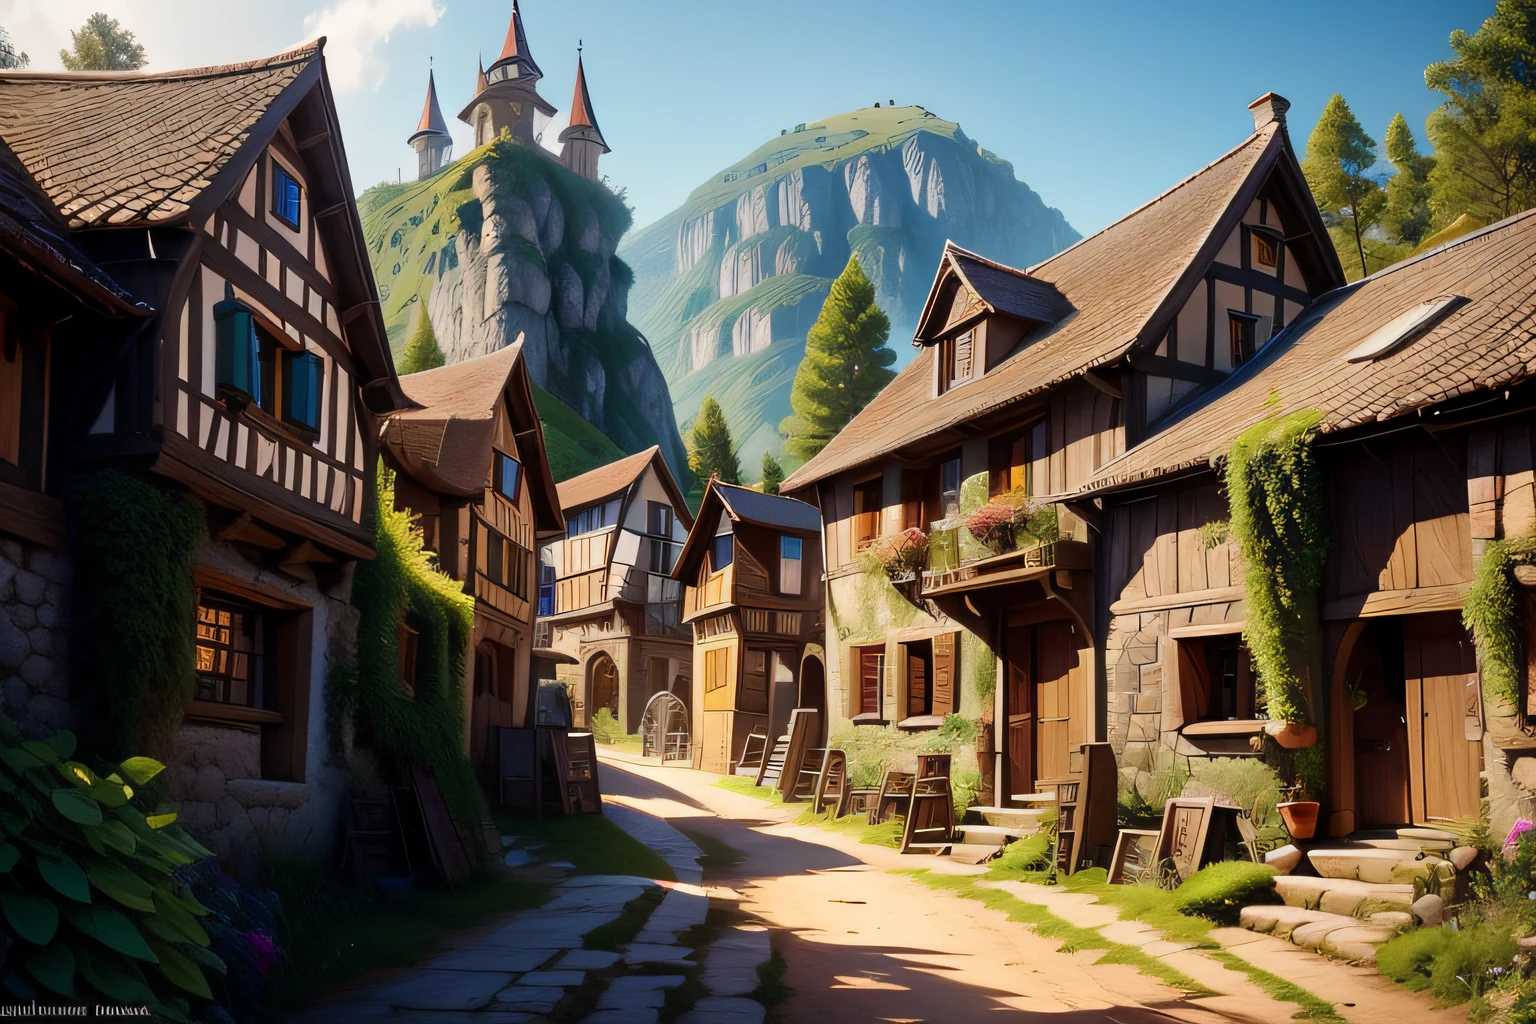 There is a small village with a lot of houses on the hill, medieval village, village in the woods, medeival fantasy town, fantasy town setting, medieval fantasy game art, medieval city, uma pequena medieval village, quaint village, medieval town landscape, medieval city, realistic fantasy rendering, villages ， engine unreal, fissure, medieval concept art, fantasy city